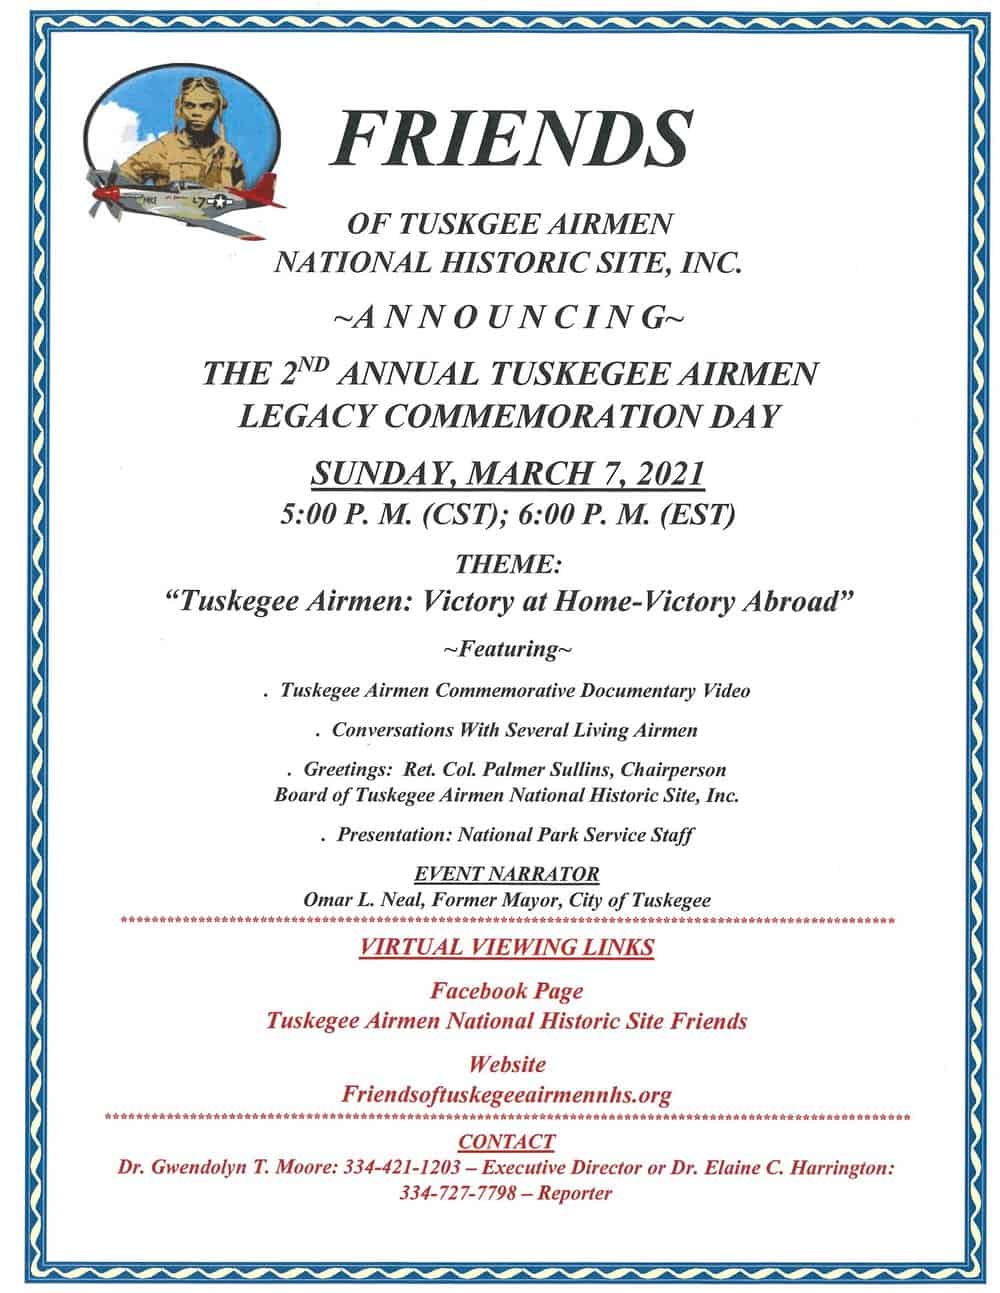 2nd_Annual_Tuskegee_Airmen_Legacy_Commemoration_Day.jpg